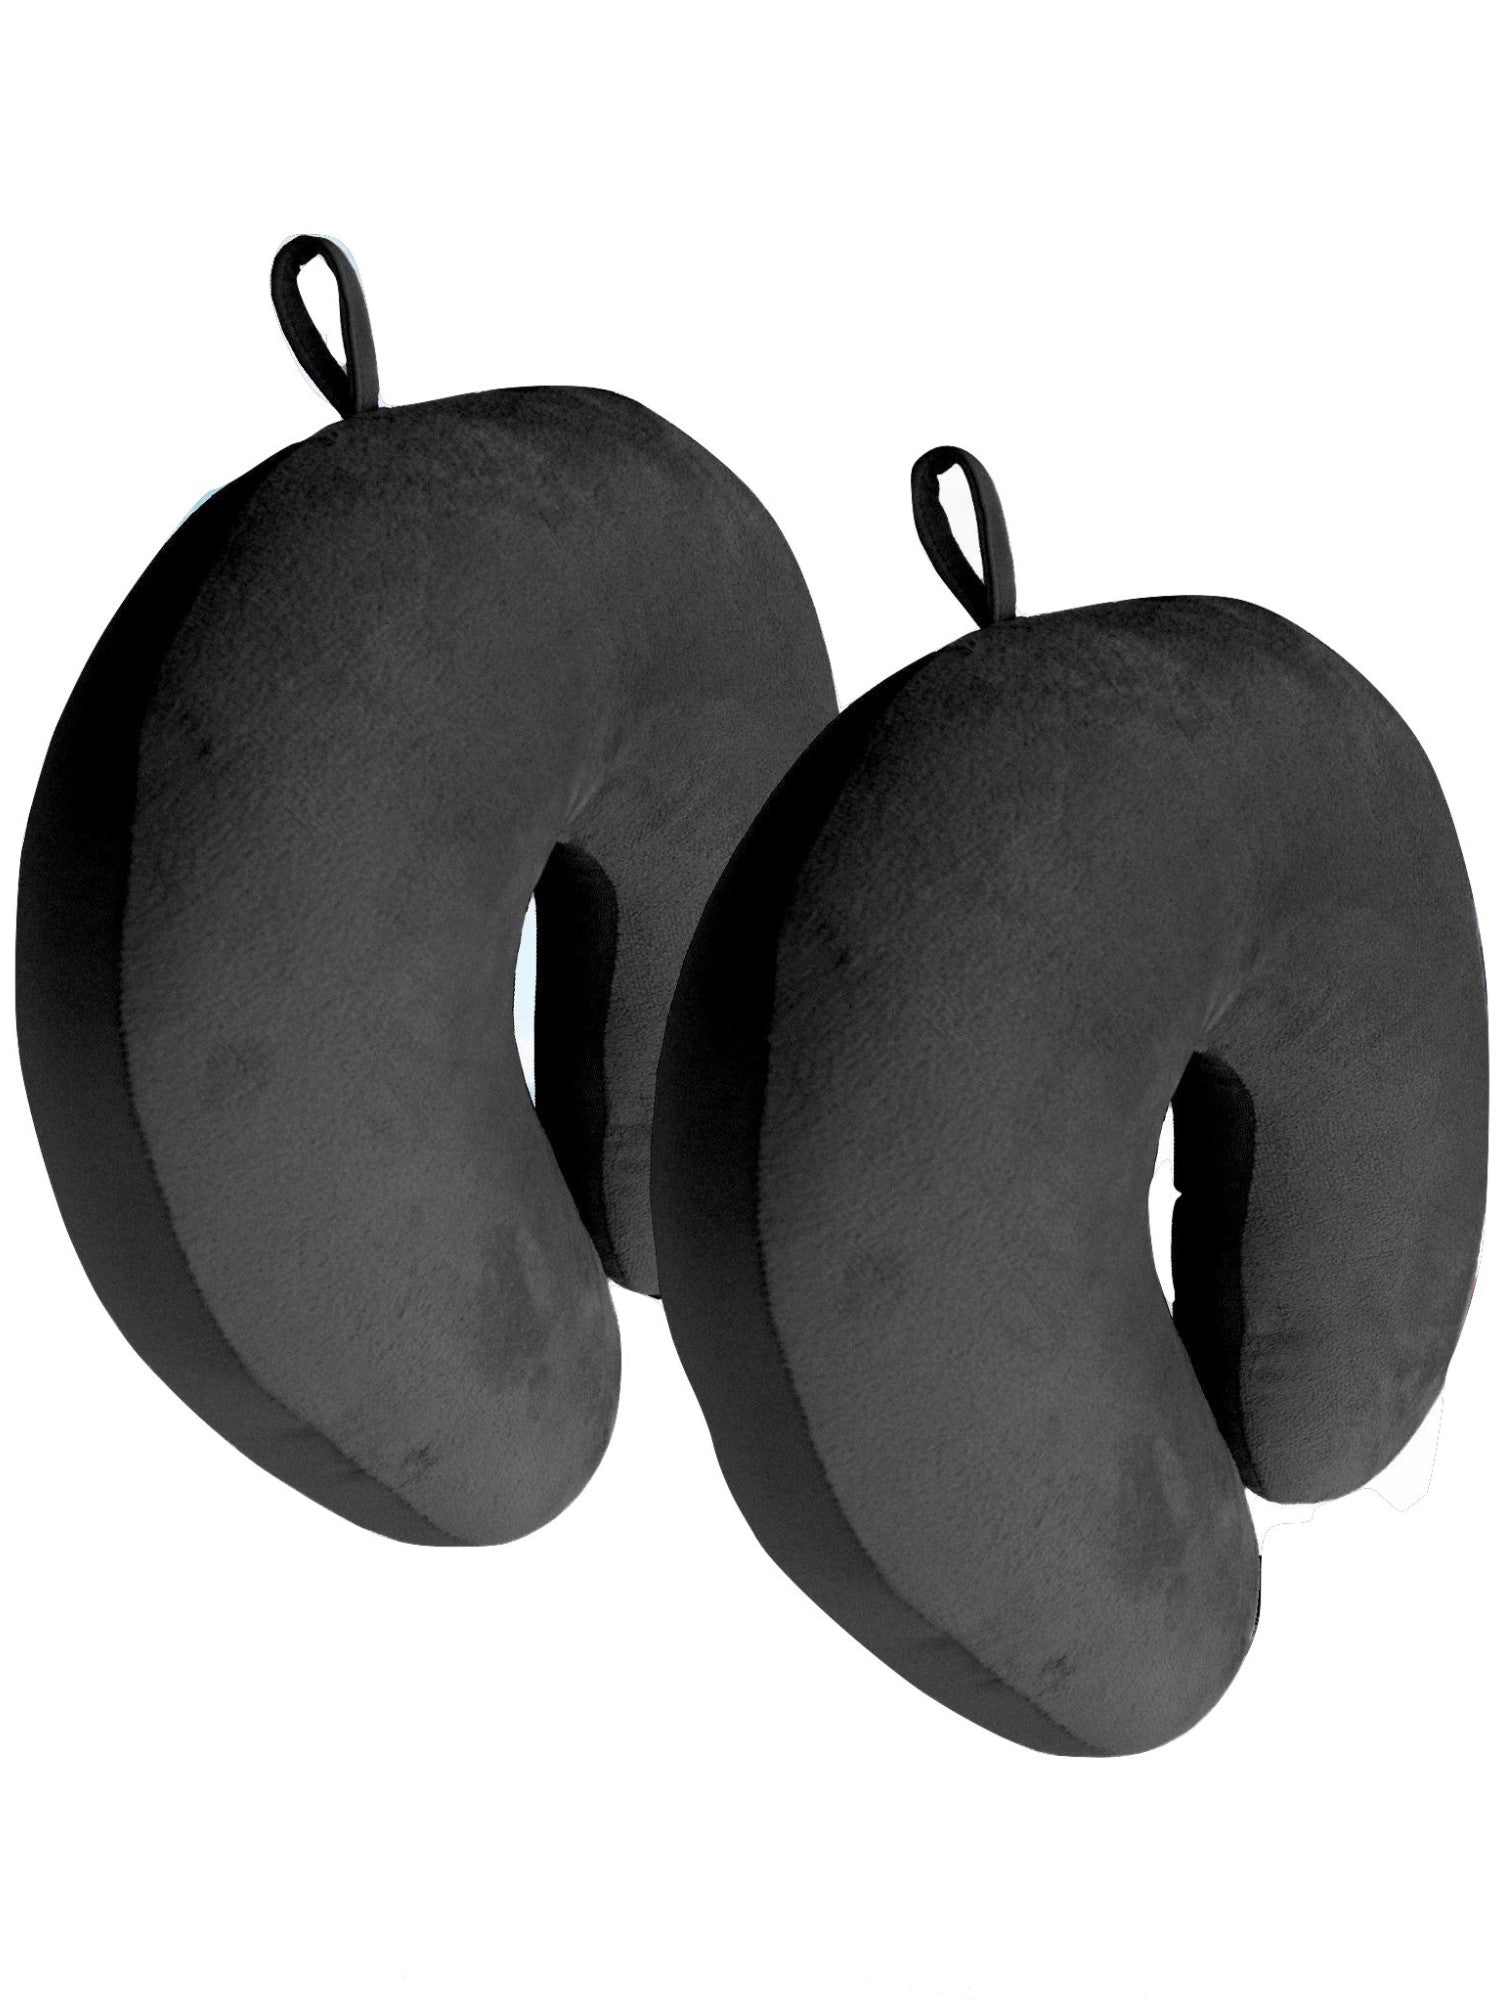 Bookishbunny 2 Pack Ultralight Micro Beads U Shaped Neck Pillow Travel Head Cervical Support Cushion Black